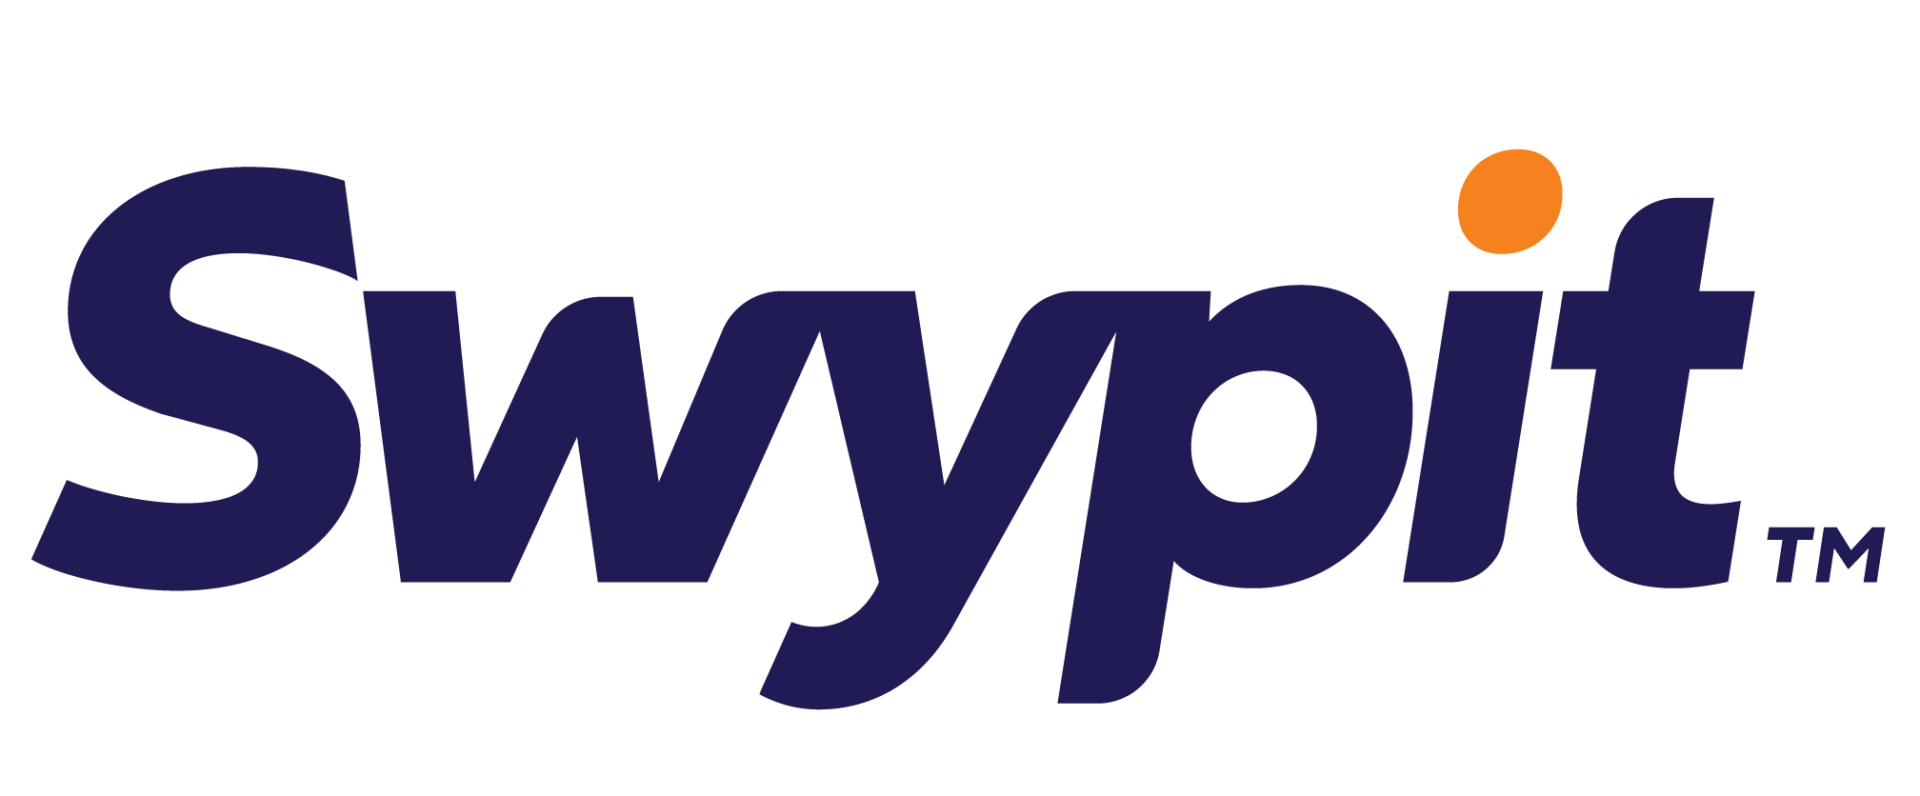 An image of the Swypit logo; "Swypit" in dark blue letter with an orange dot over the "i".